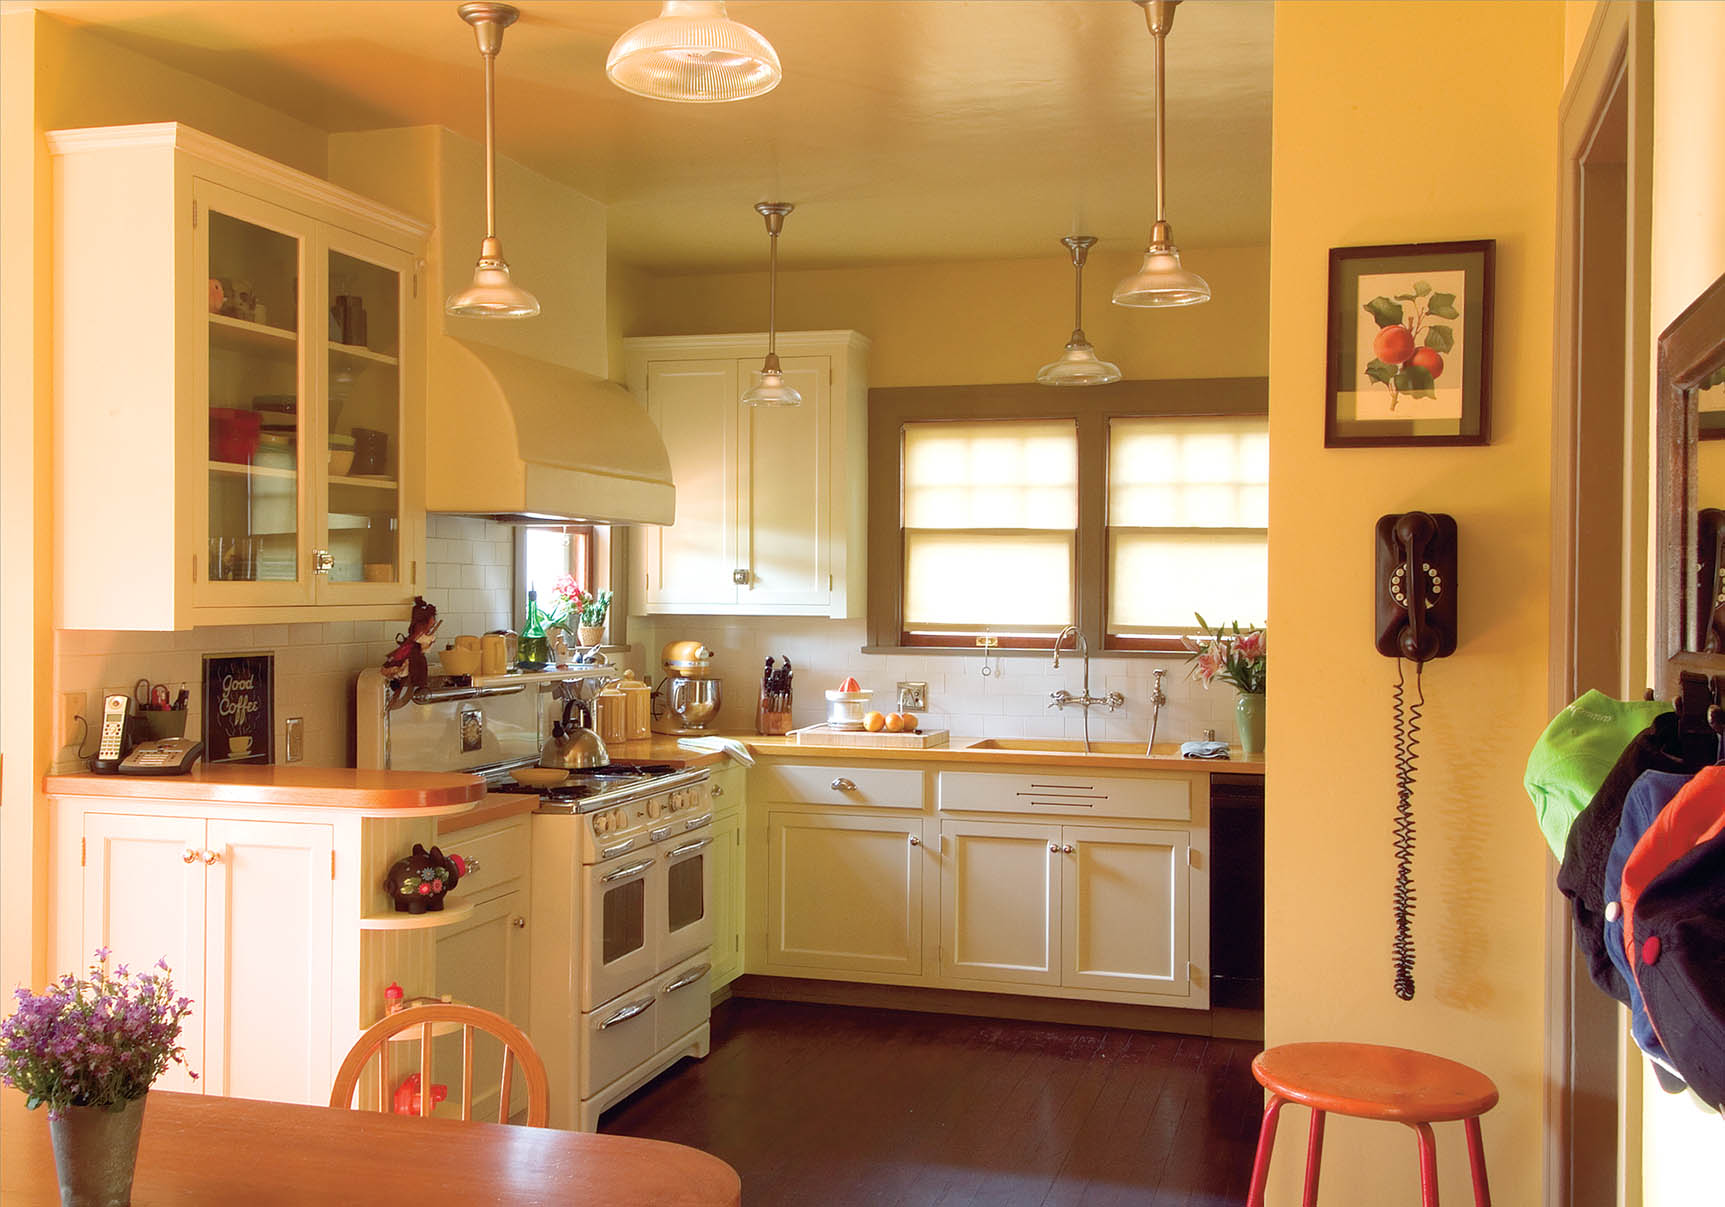  Bungalow  Kitchens  Changing With The Times American 